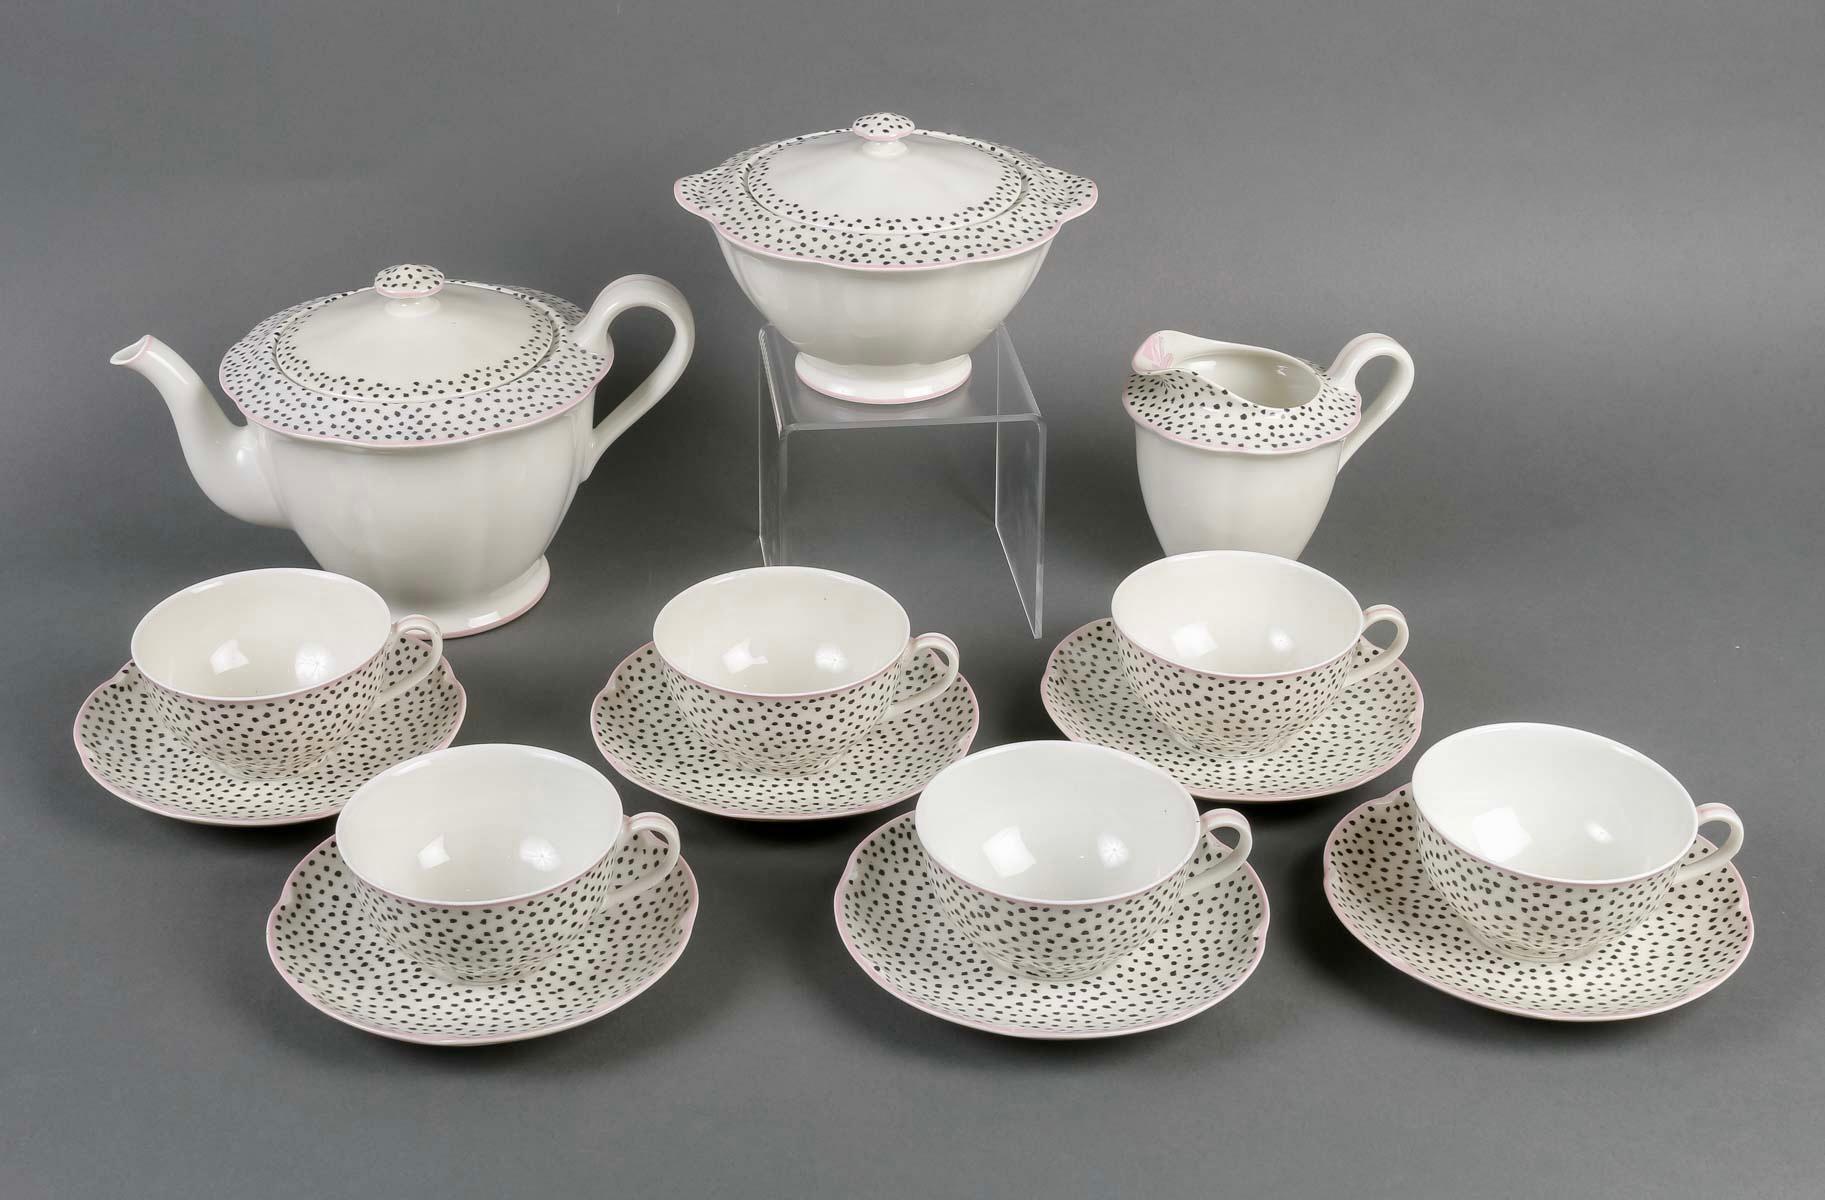 Coffee Set made in Limoges porcelain by Haviland and Suzanne Lalique.
All pieces are signed.

All pieces are in perfect condition.

Service including: 
 - 6 cups and 6 saucers
- 1 coffee pot
- 1 milk jug
- 1 sugar pot